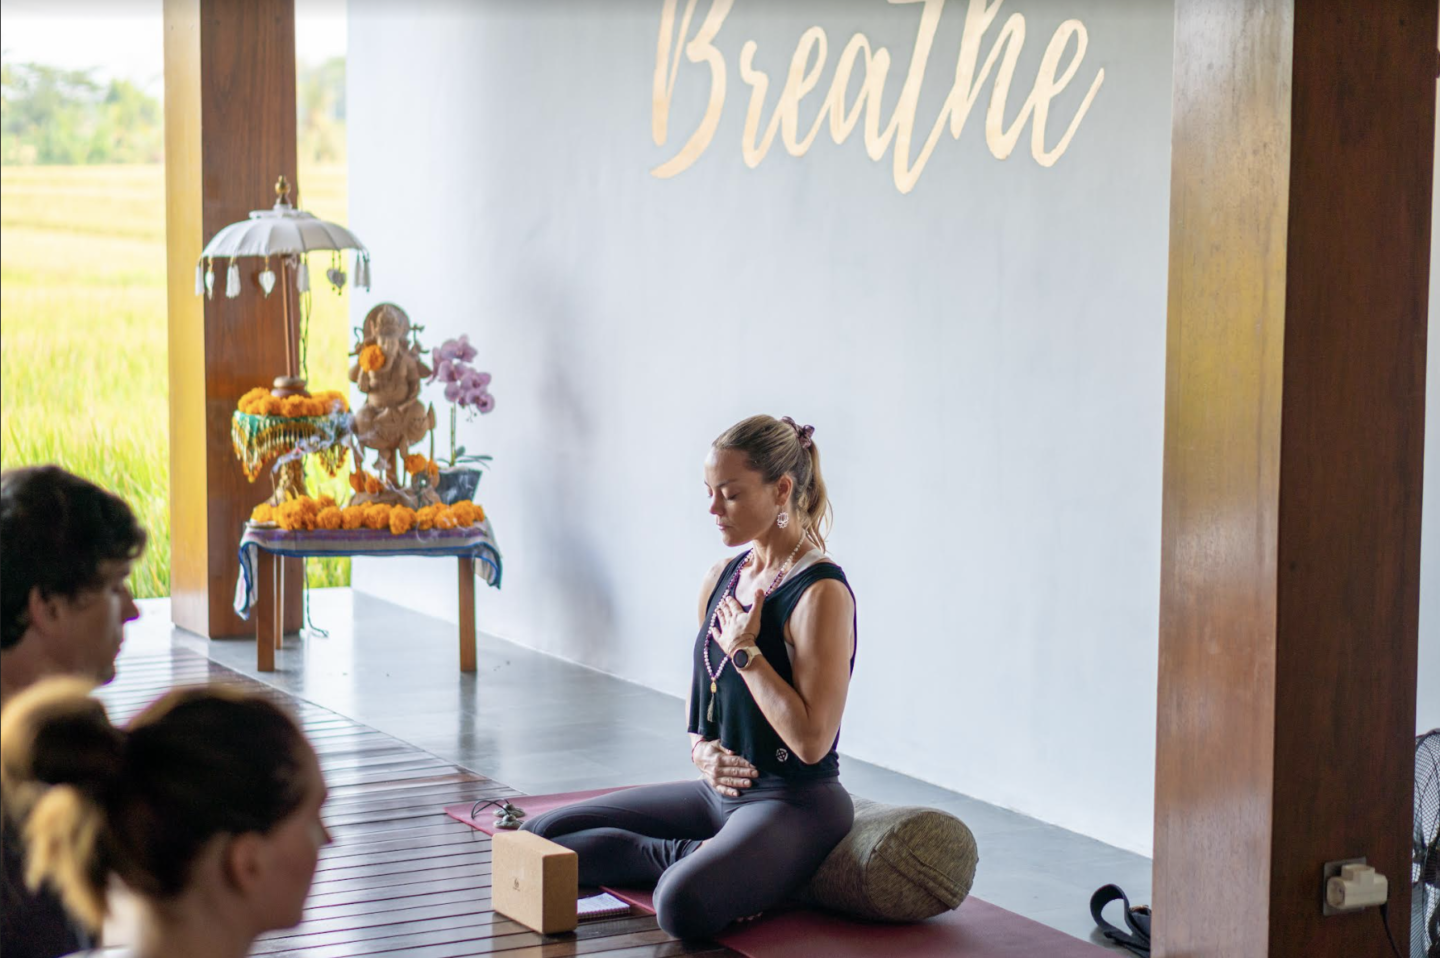 A group of people participating in yoga in a room with a sign that says breathe during their Bali yoga training.